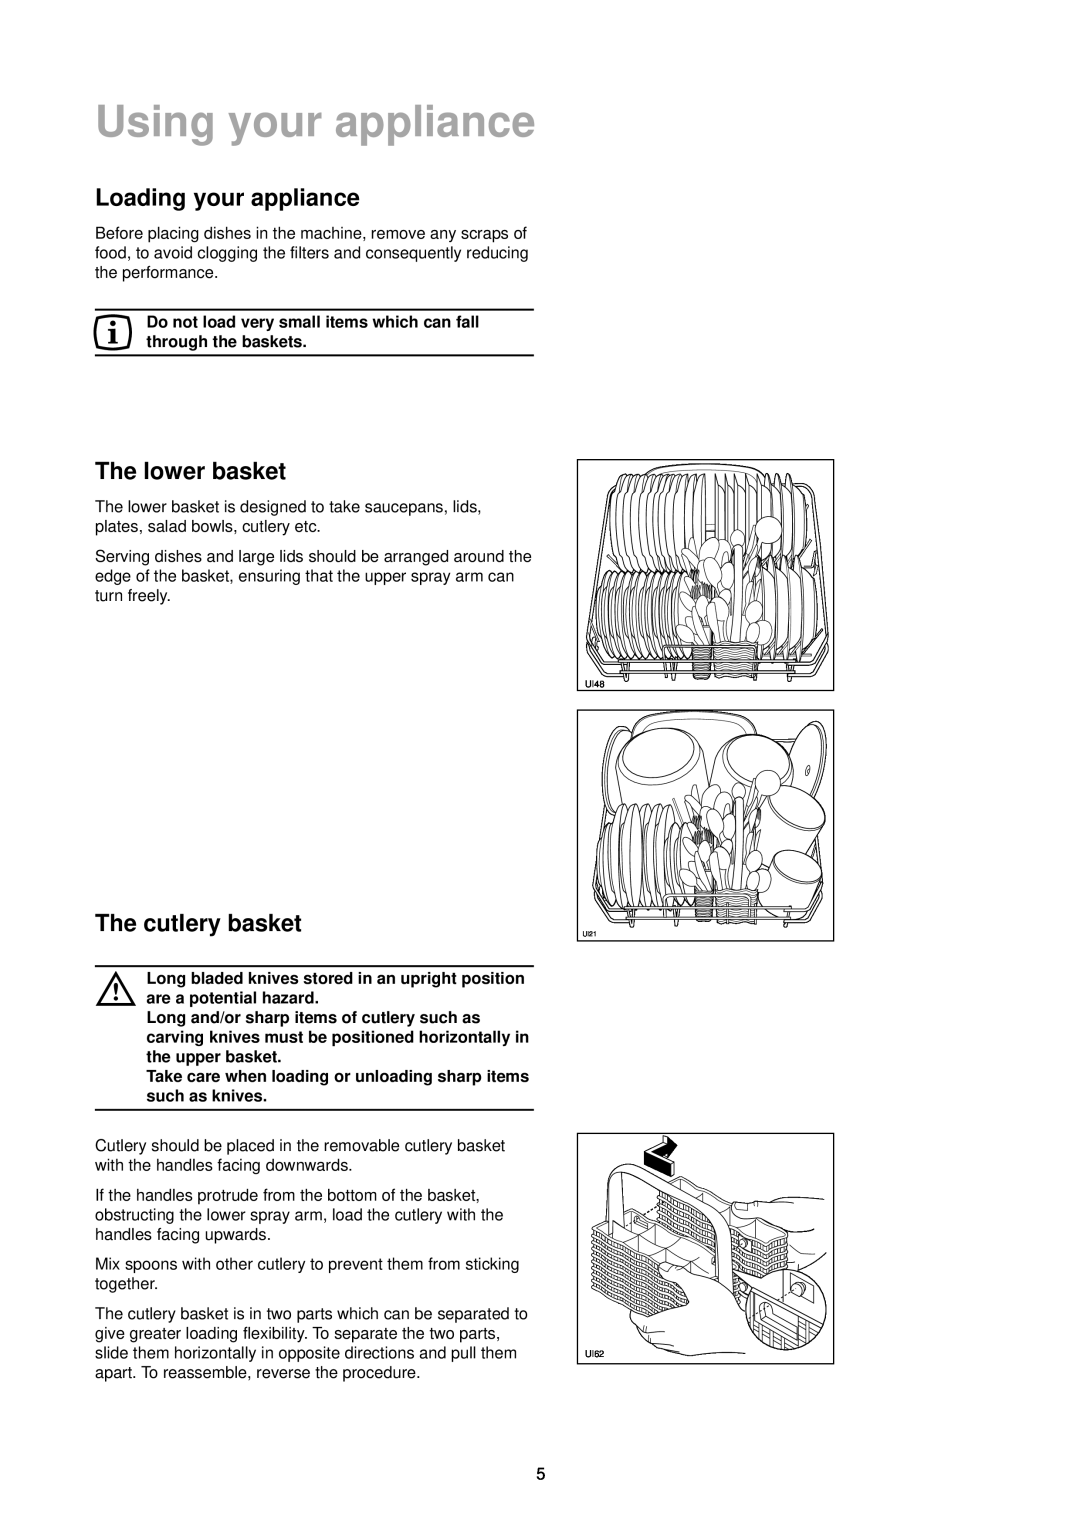 Zanussi DA 6141 manual Using your appliance, Loading your appliance, The lower basket, The cutlery basket 